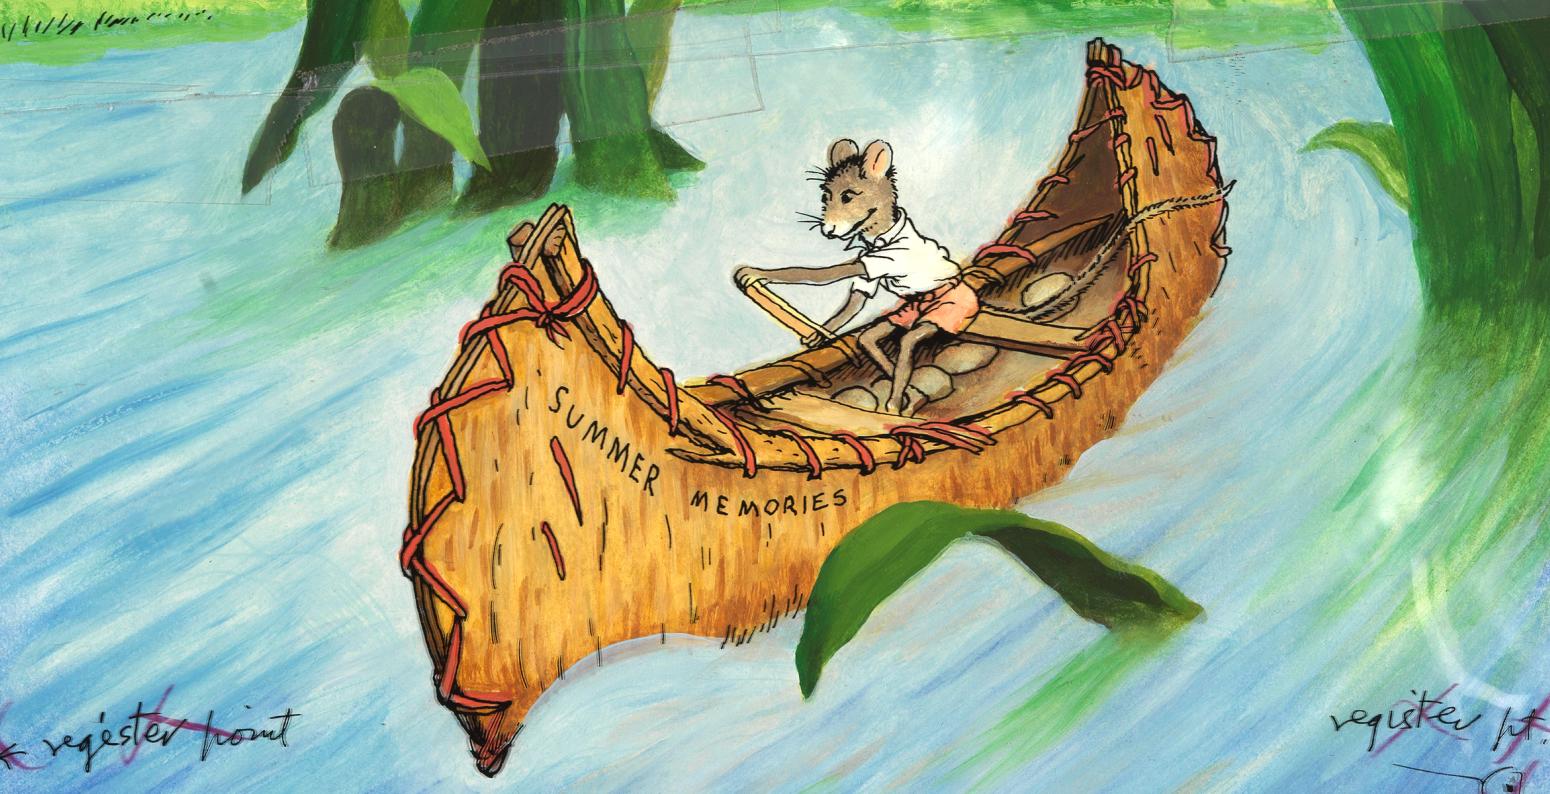 Illustration of mouse in canoe.